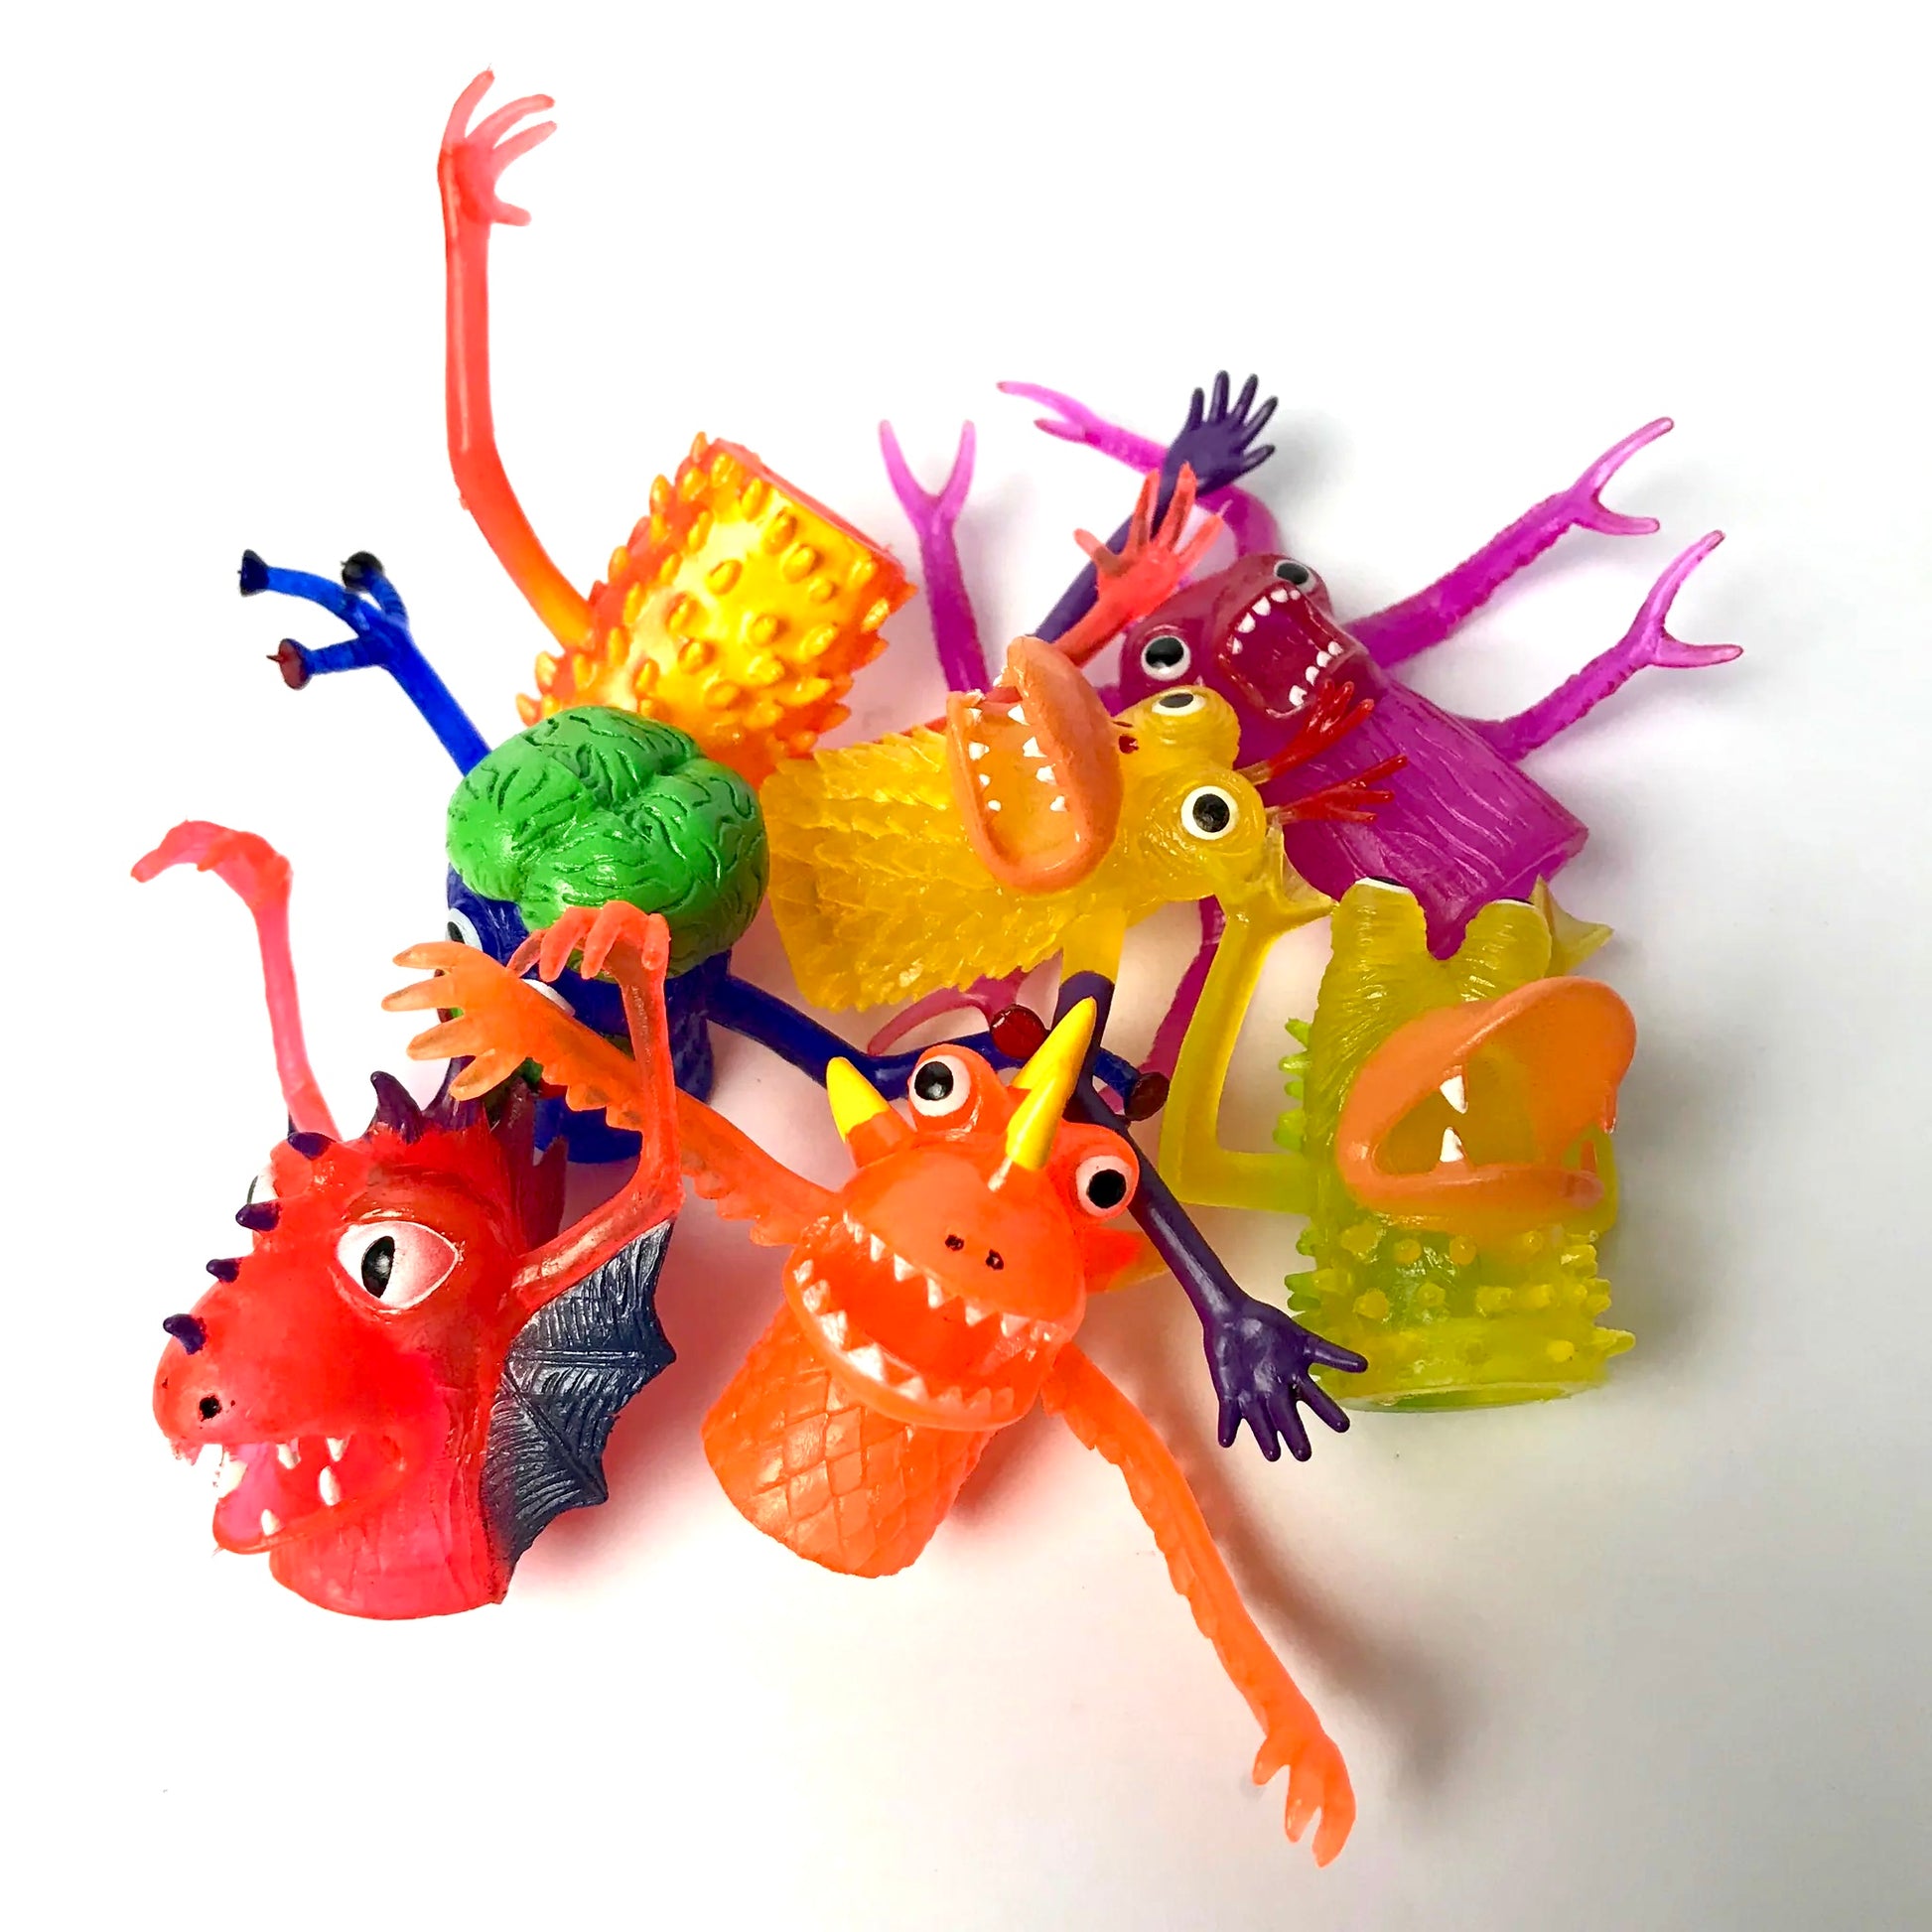 A group of seven finger monster puppets of different shapes and sizes are sitting together on a white background.